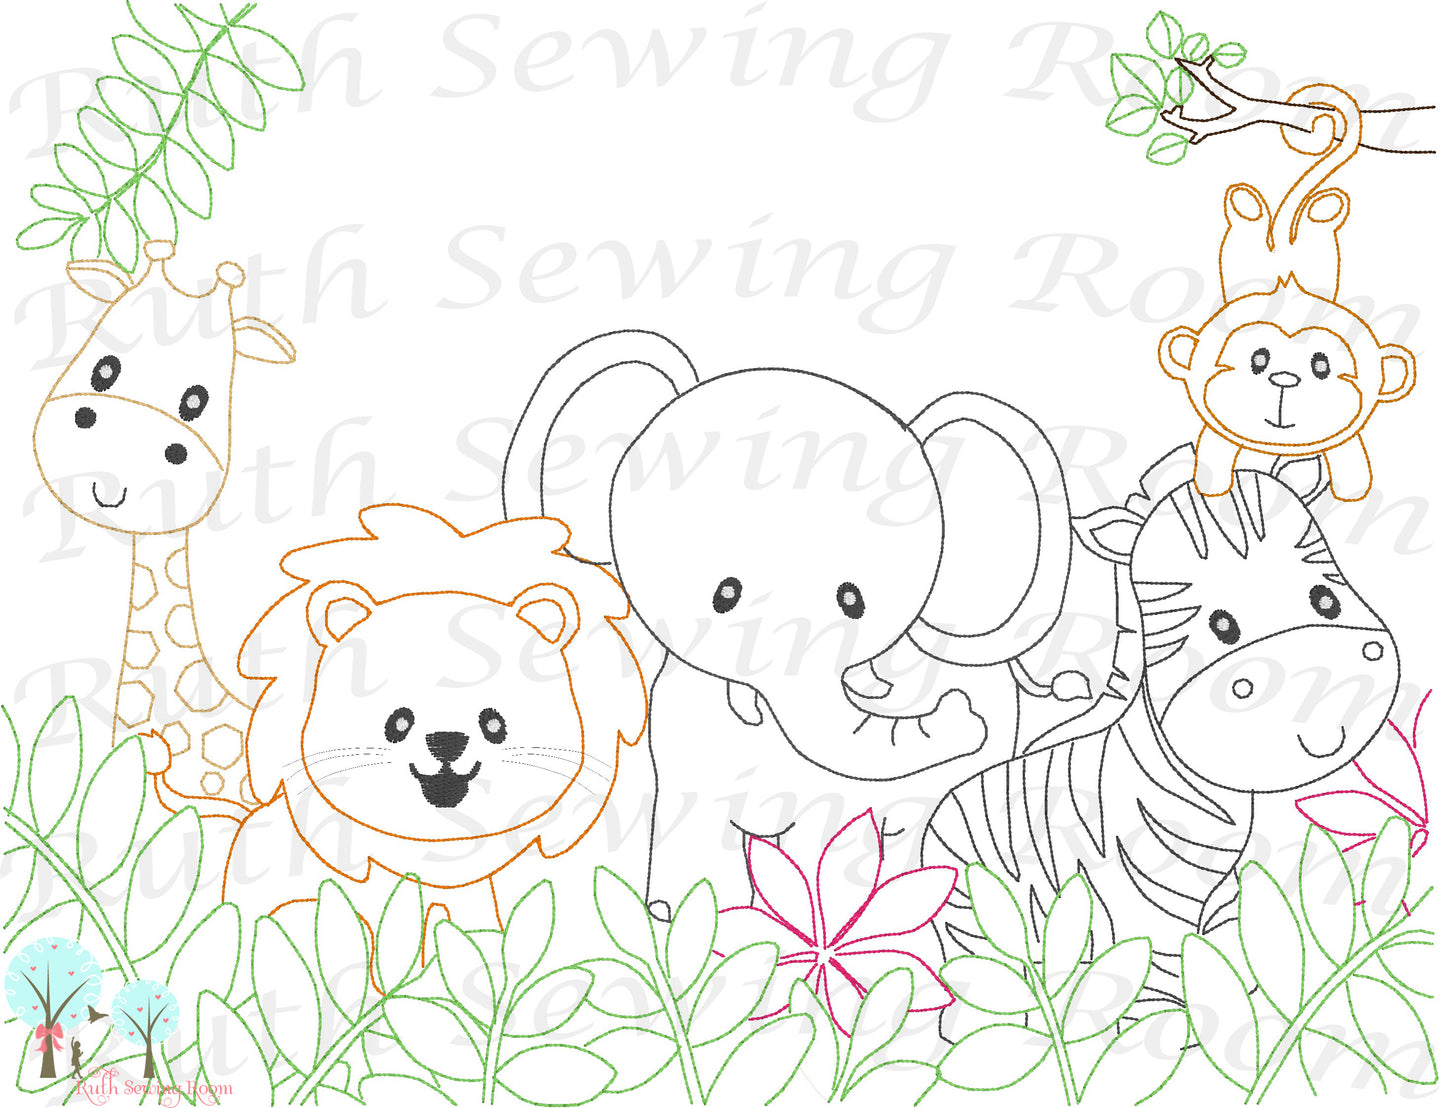 Safari Animals - Elephant, Lion, Monkey, Zebra and Giraffe Vintage Stitch Design Instant download Machine Embroidery - This is NOT a PATCH